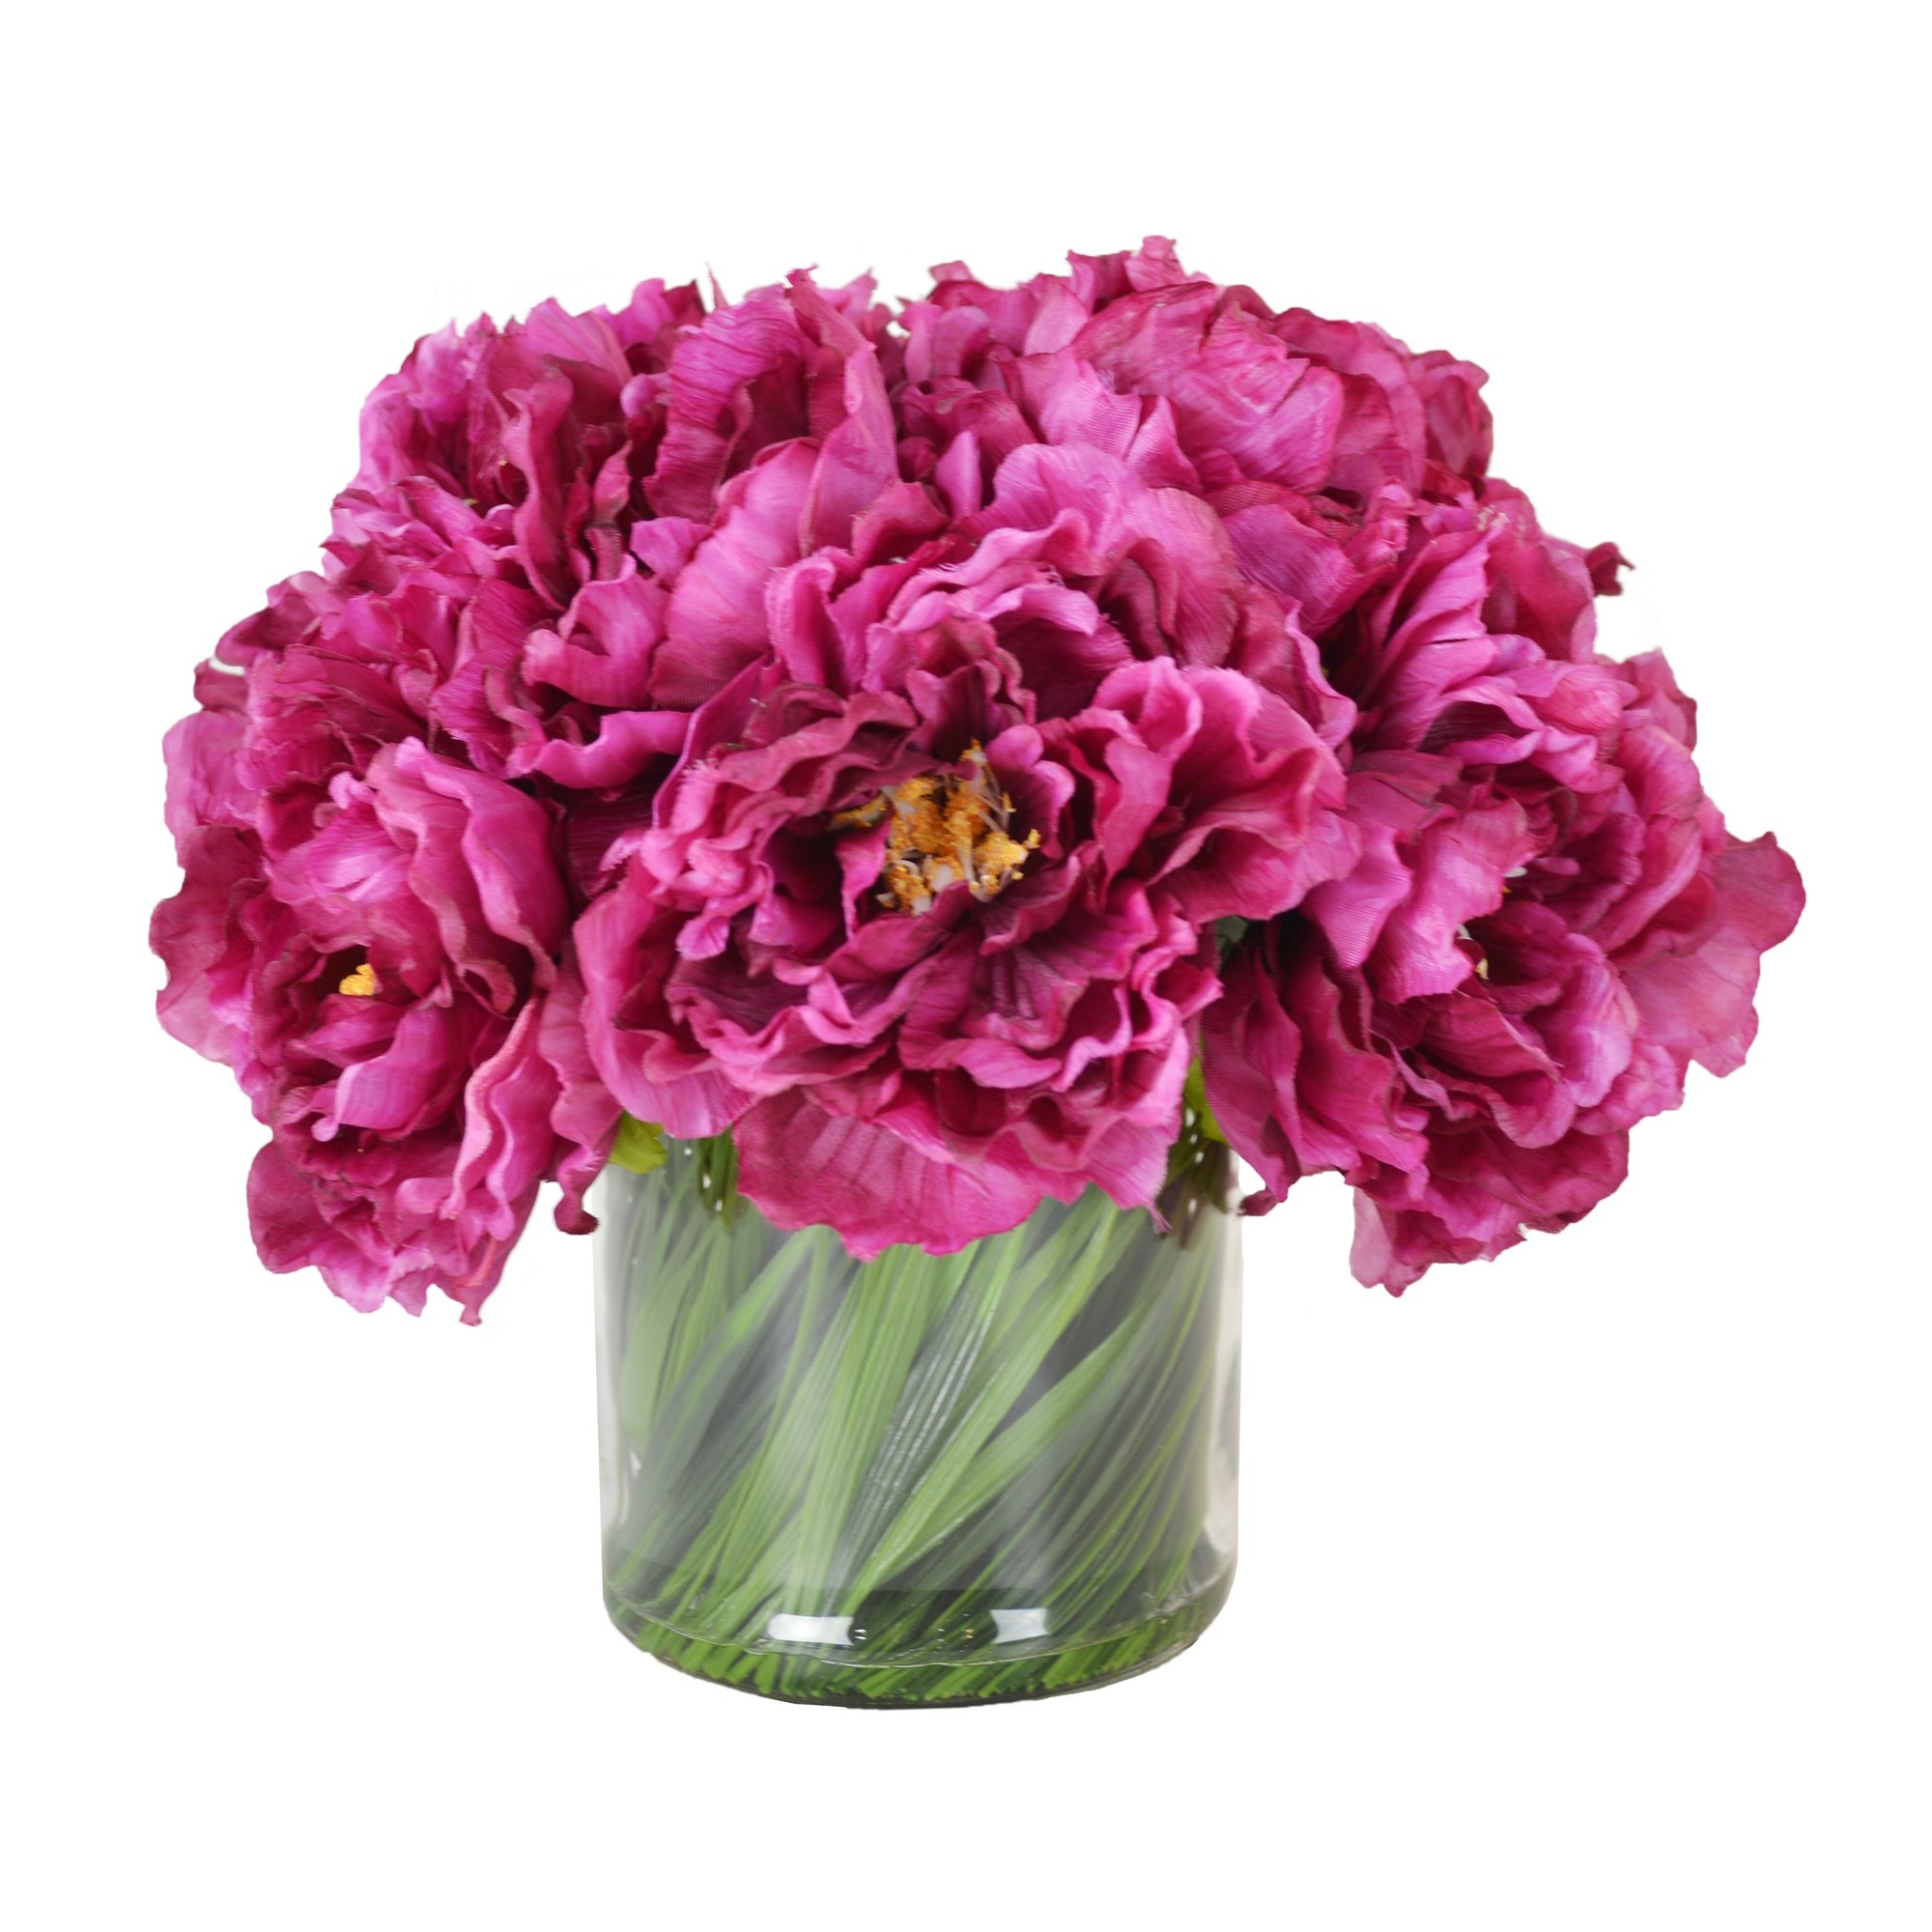 Magenta Peony Bouquet in Acrylic Water Glass Vase - Image 0